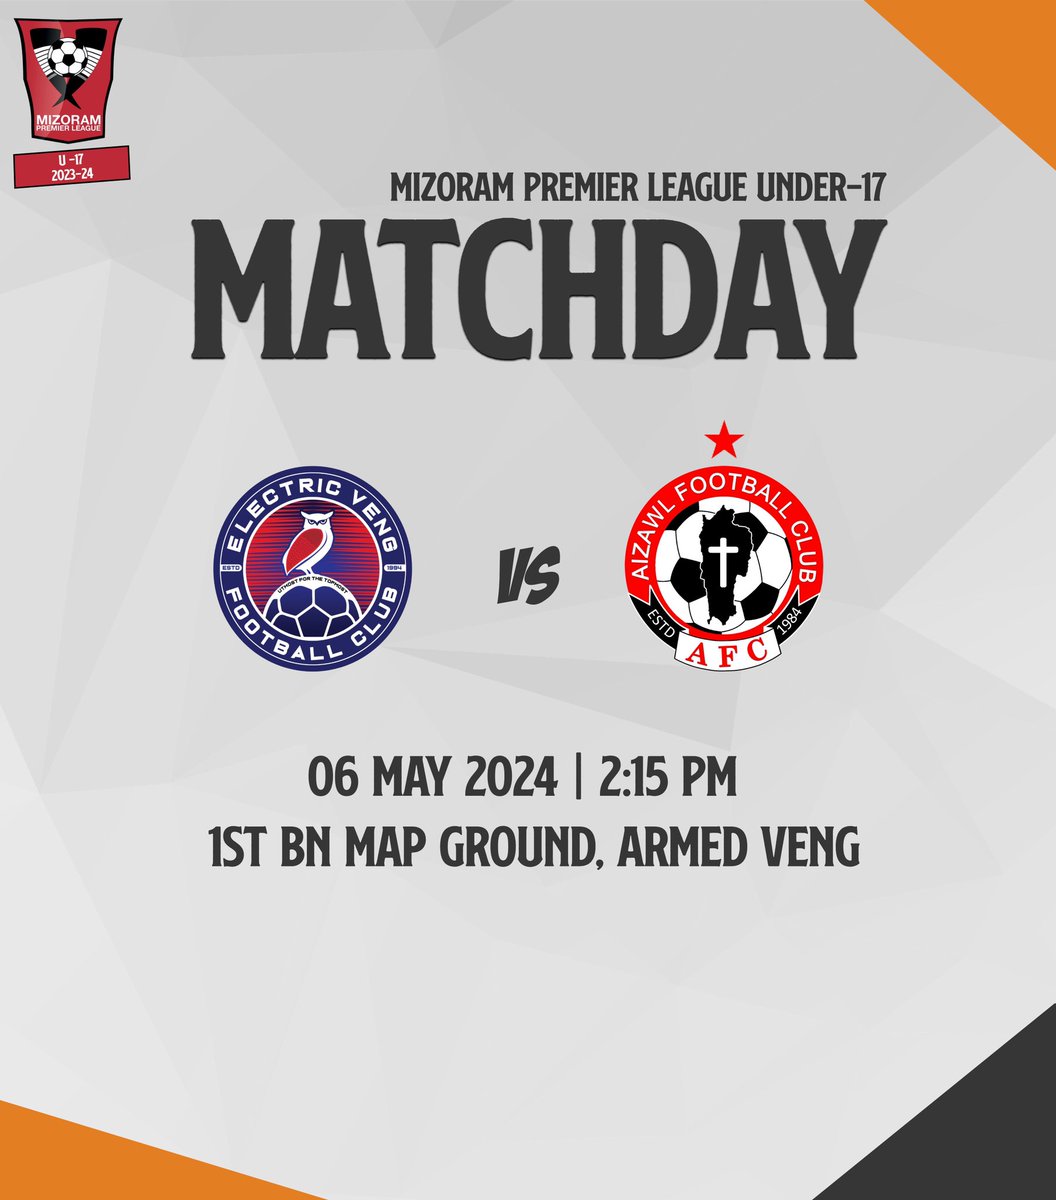 Our Mizoram Premier League Under-17 campaign begins with a match against Electric Veng FC. ⏳: 2:15 PM 🏟️: 1st BN MAP Ground, Armed Veng #AizawlFC #WeAreAFC #ThePeoplesClub #MPLU17